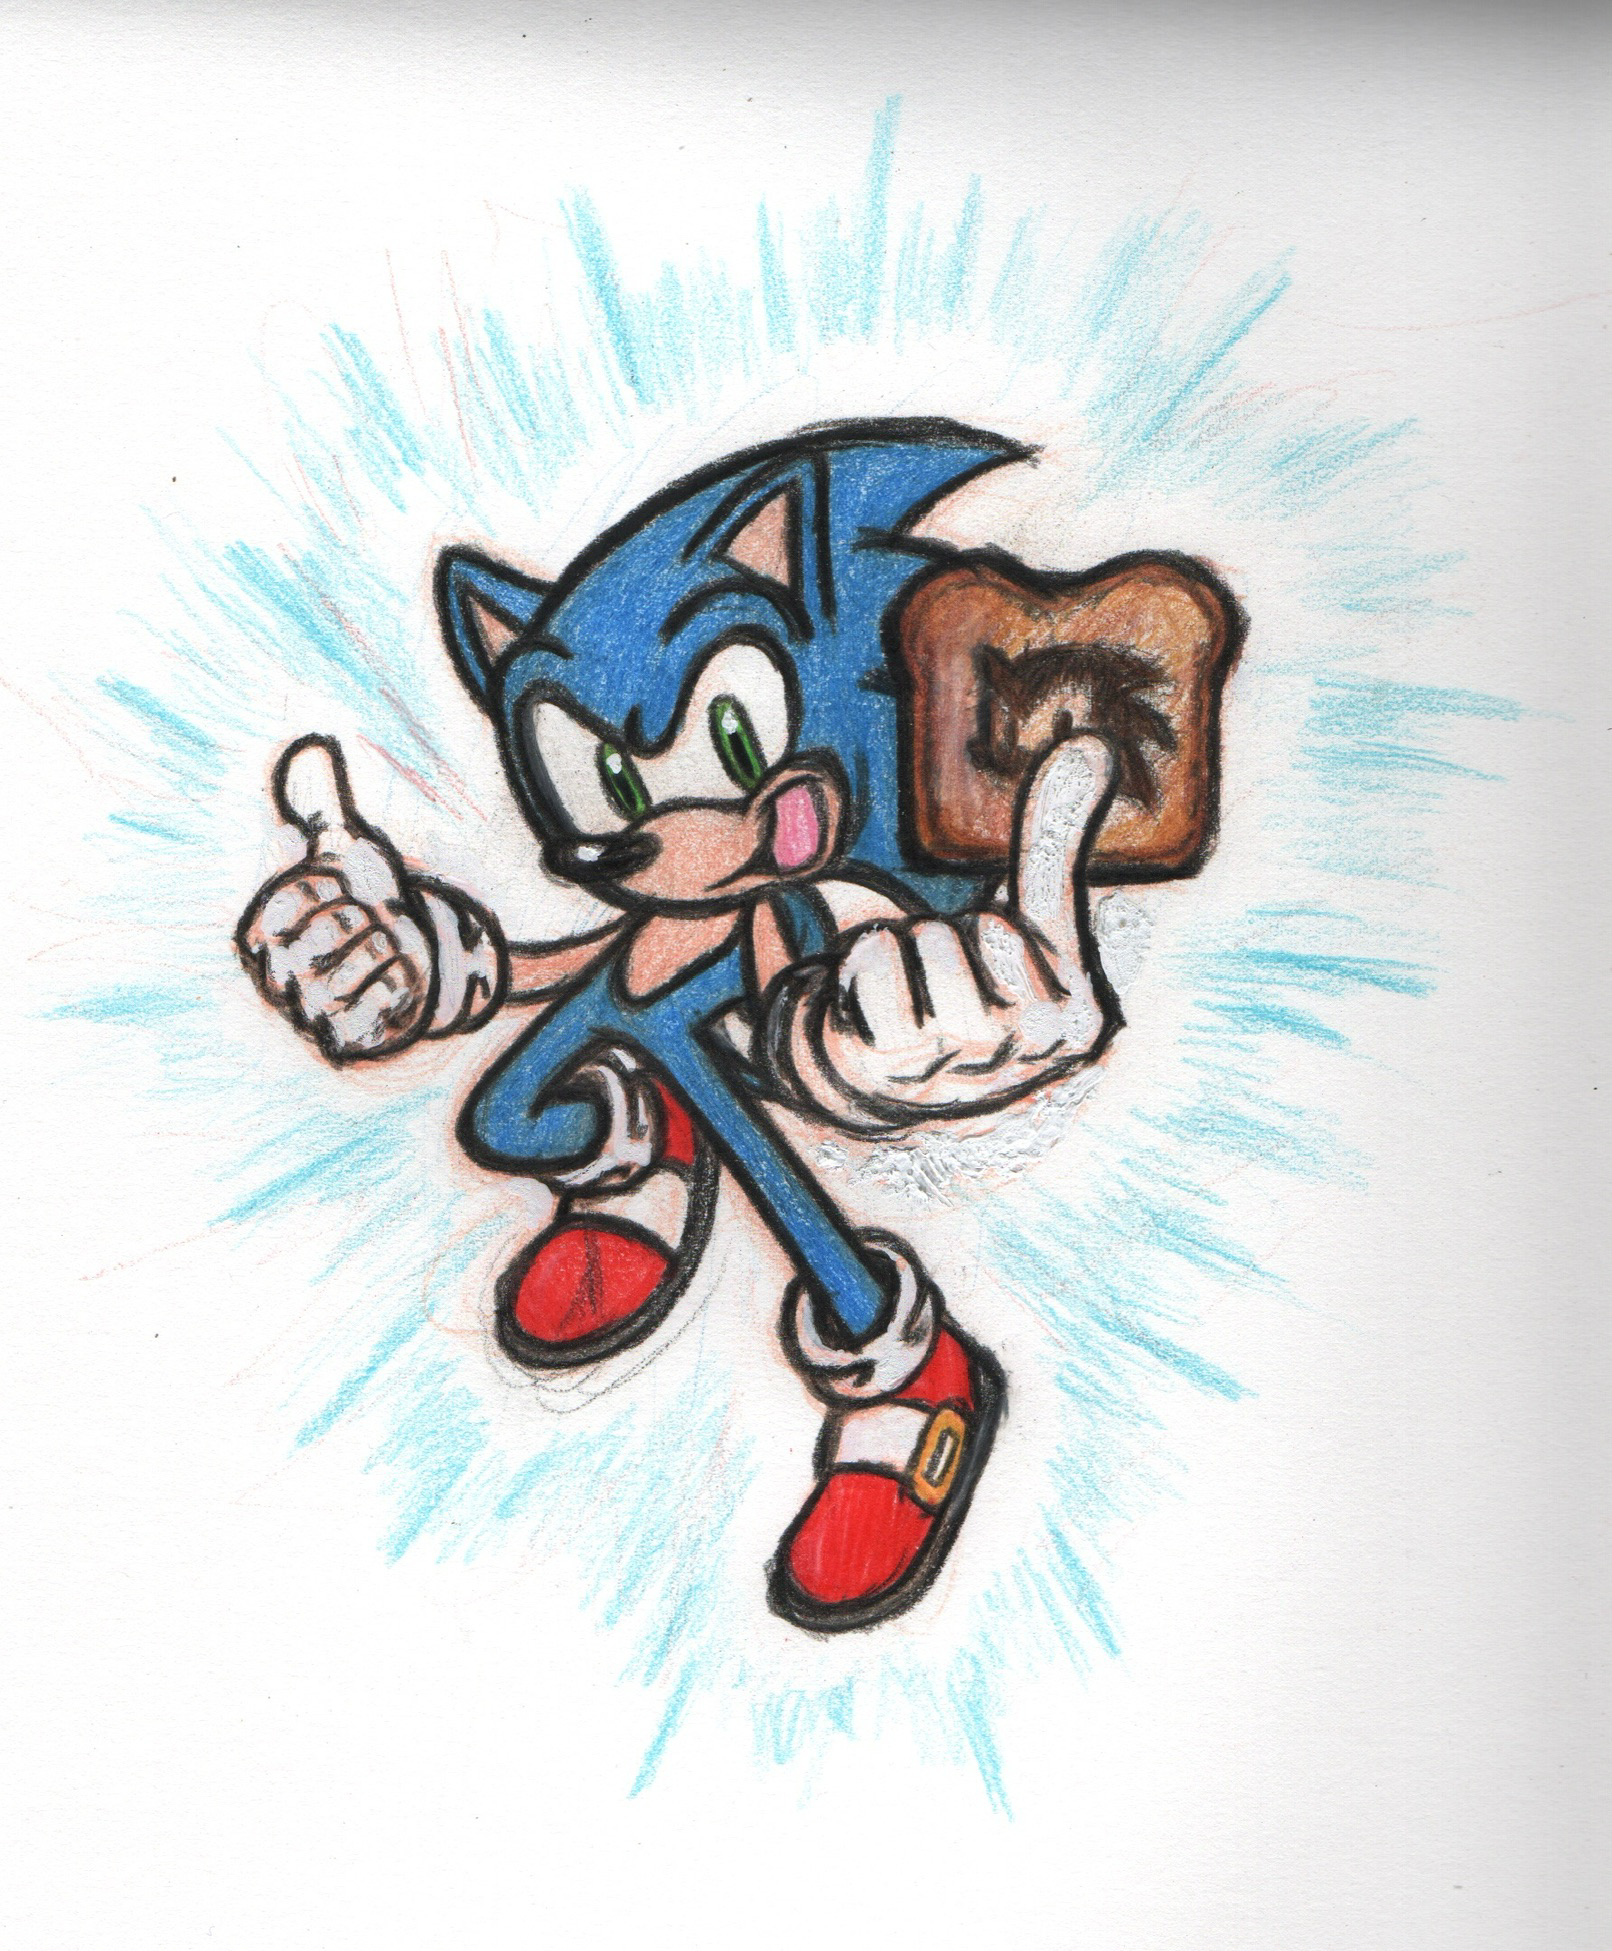 Classic Sonic Japanese style coloring practice! by WildWildTJS on DeviantArt